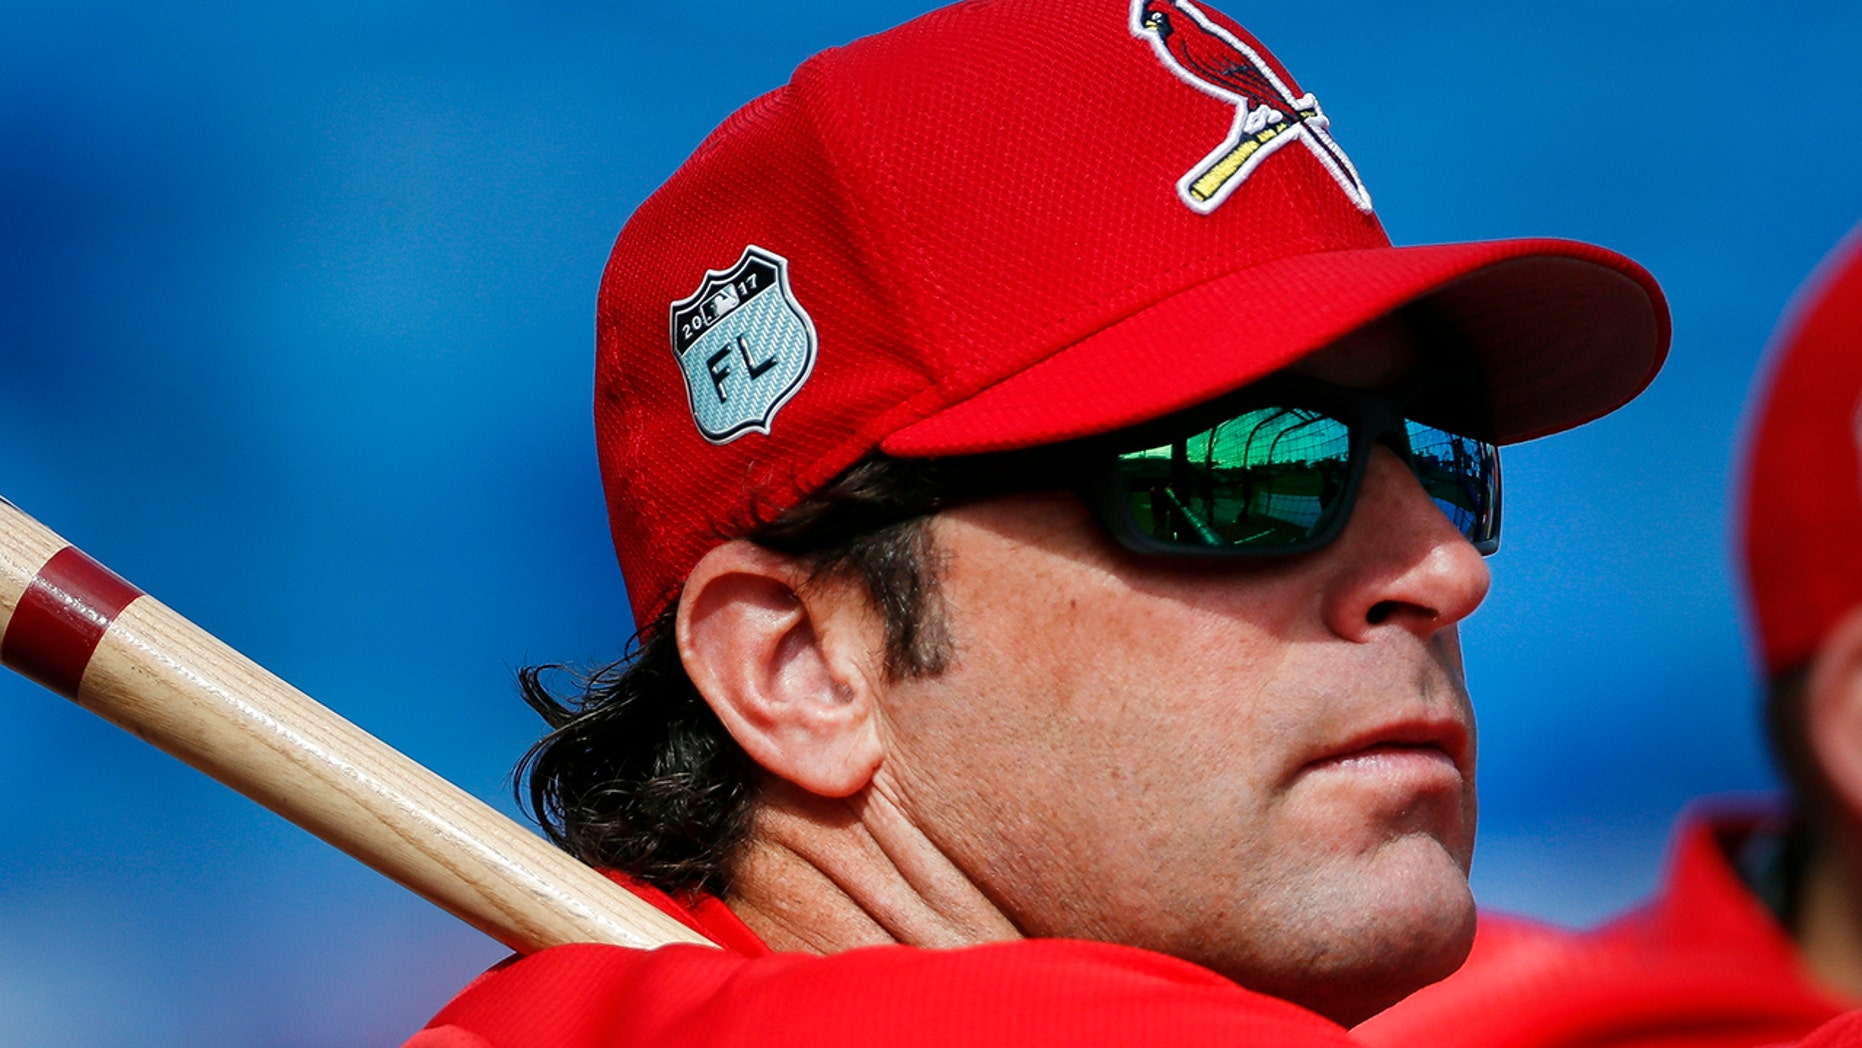 FILE - In this March 17, 2017, file photo, St. Louis Cardinals manager Mike Matheny (22) watches batting practice before a spring training baseball game against the New York Mets in Port St. Lucie, Fla. The Kansas City Royals have hired Matheny as manager on Thursday, Oct. 31, 2019. The 49-year-old Matheny was manager of the cross-state Cardinals from 2012-18, going 591-474 and becoming the first manager to reach the postseason his first four seasons. (AP Photo/John Bazemore, File)